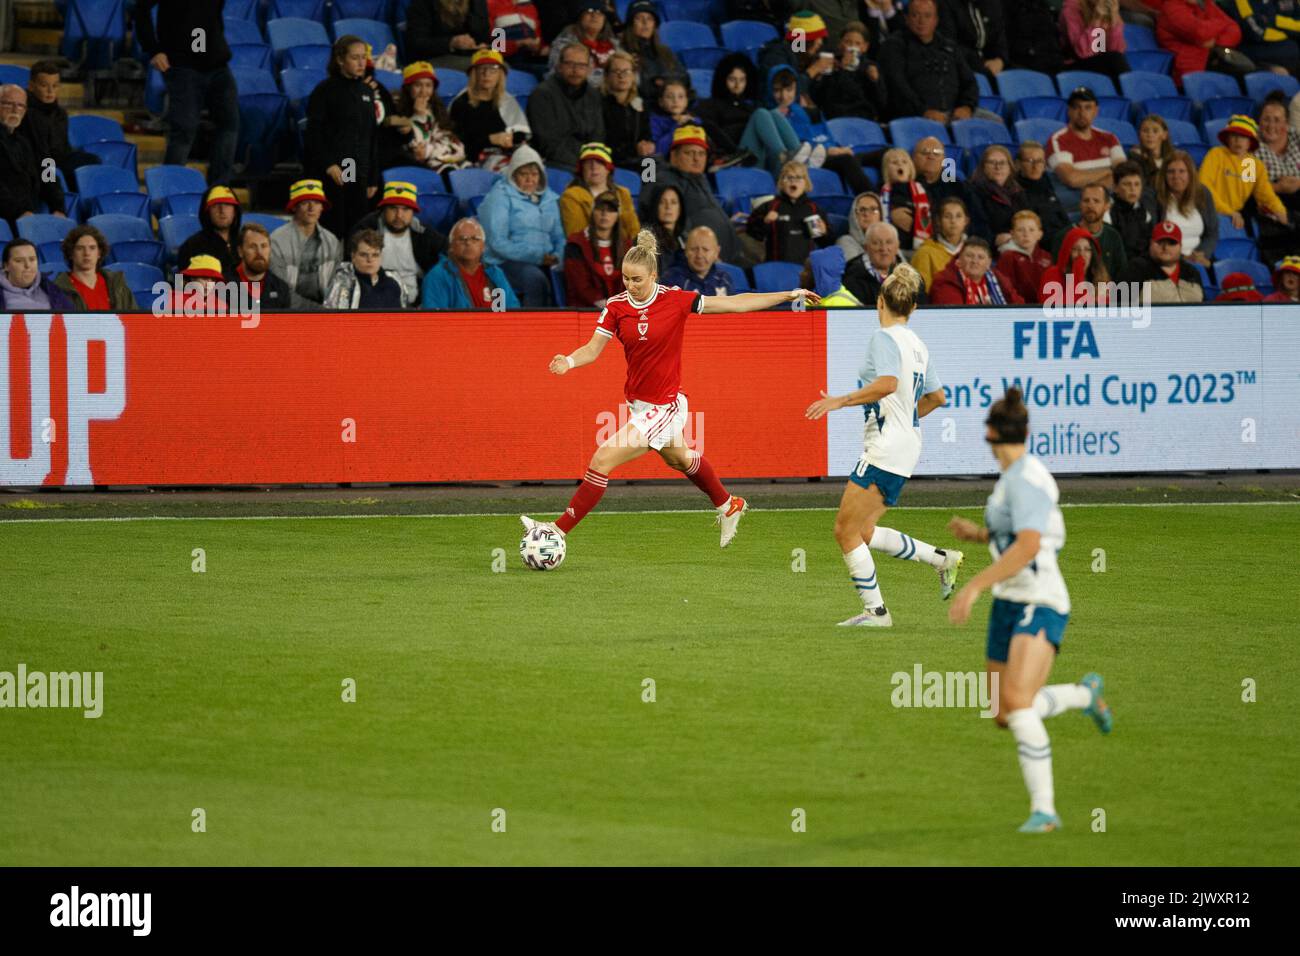 Cardiff, UK. 6th Sep, 2022. Rhiannon Roberts of Wales crosses the ball during the Wales v Slovenia Women's World Cup Qualification match. Credit: Gruffydd Thomas/Alamy Live News Stock Photo